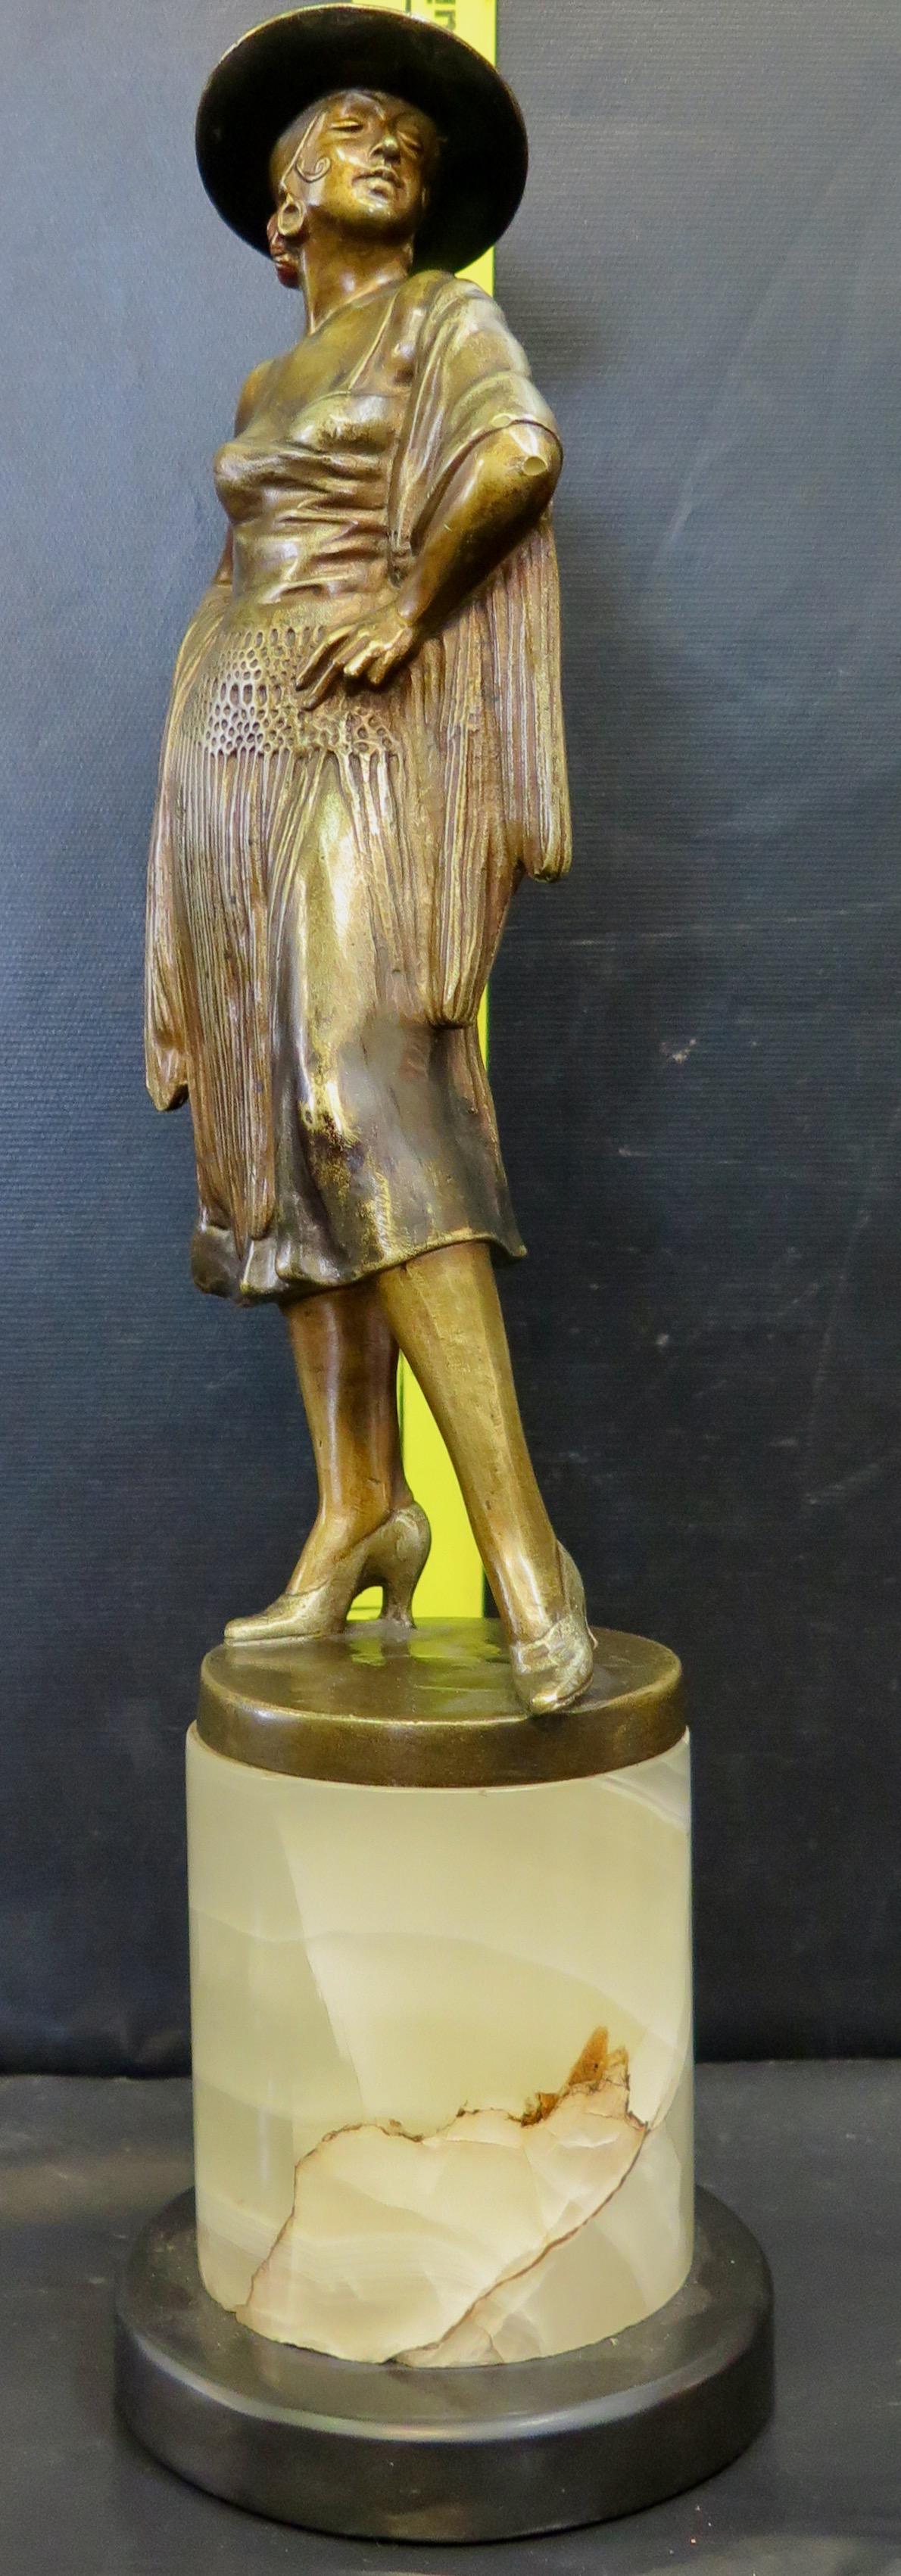 A stunning vintage Art Deco patinated bronze sculpture. It is a statue of a beautifully costumed & detailed Flamenco lady dancer & contains some cold painted elements. The bronze is by Bruno Zach (a.k.a. Barner) an Austrian Art Deco sculptor of